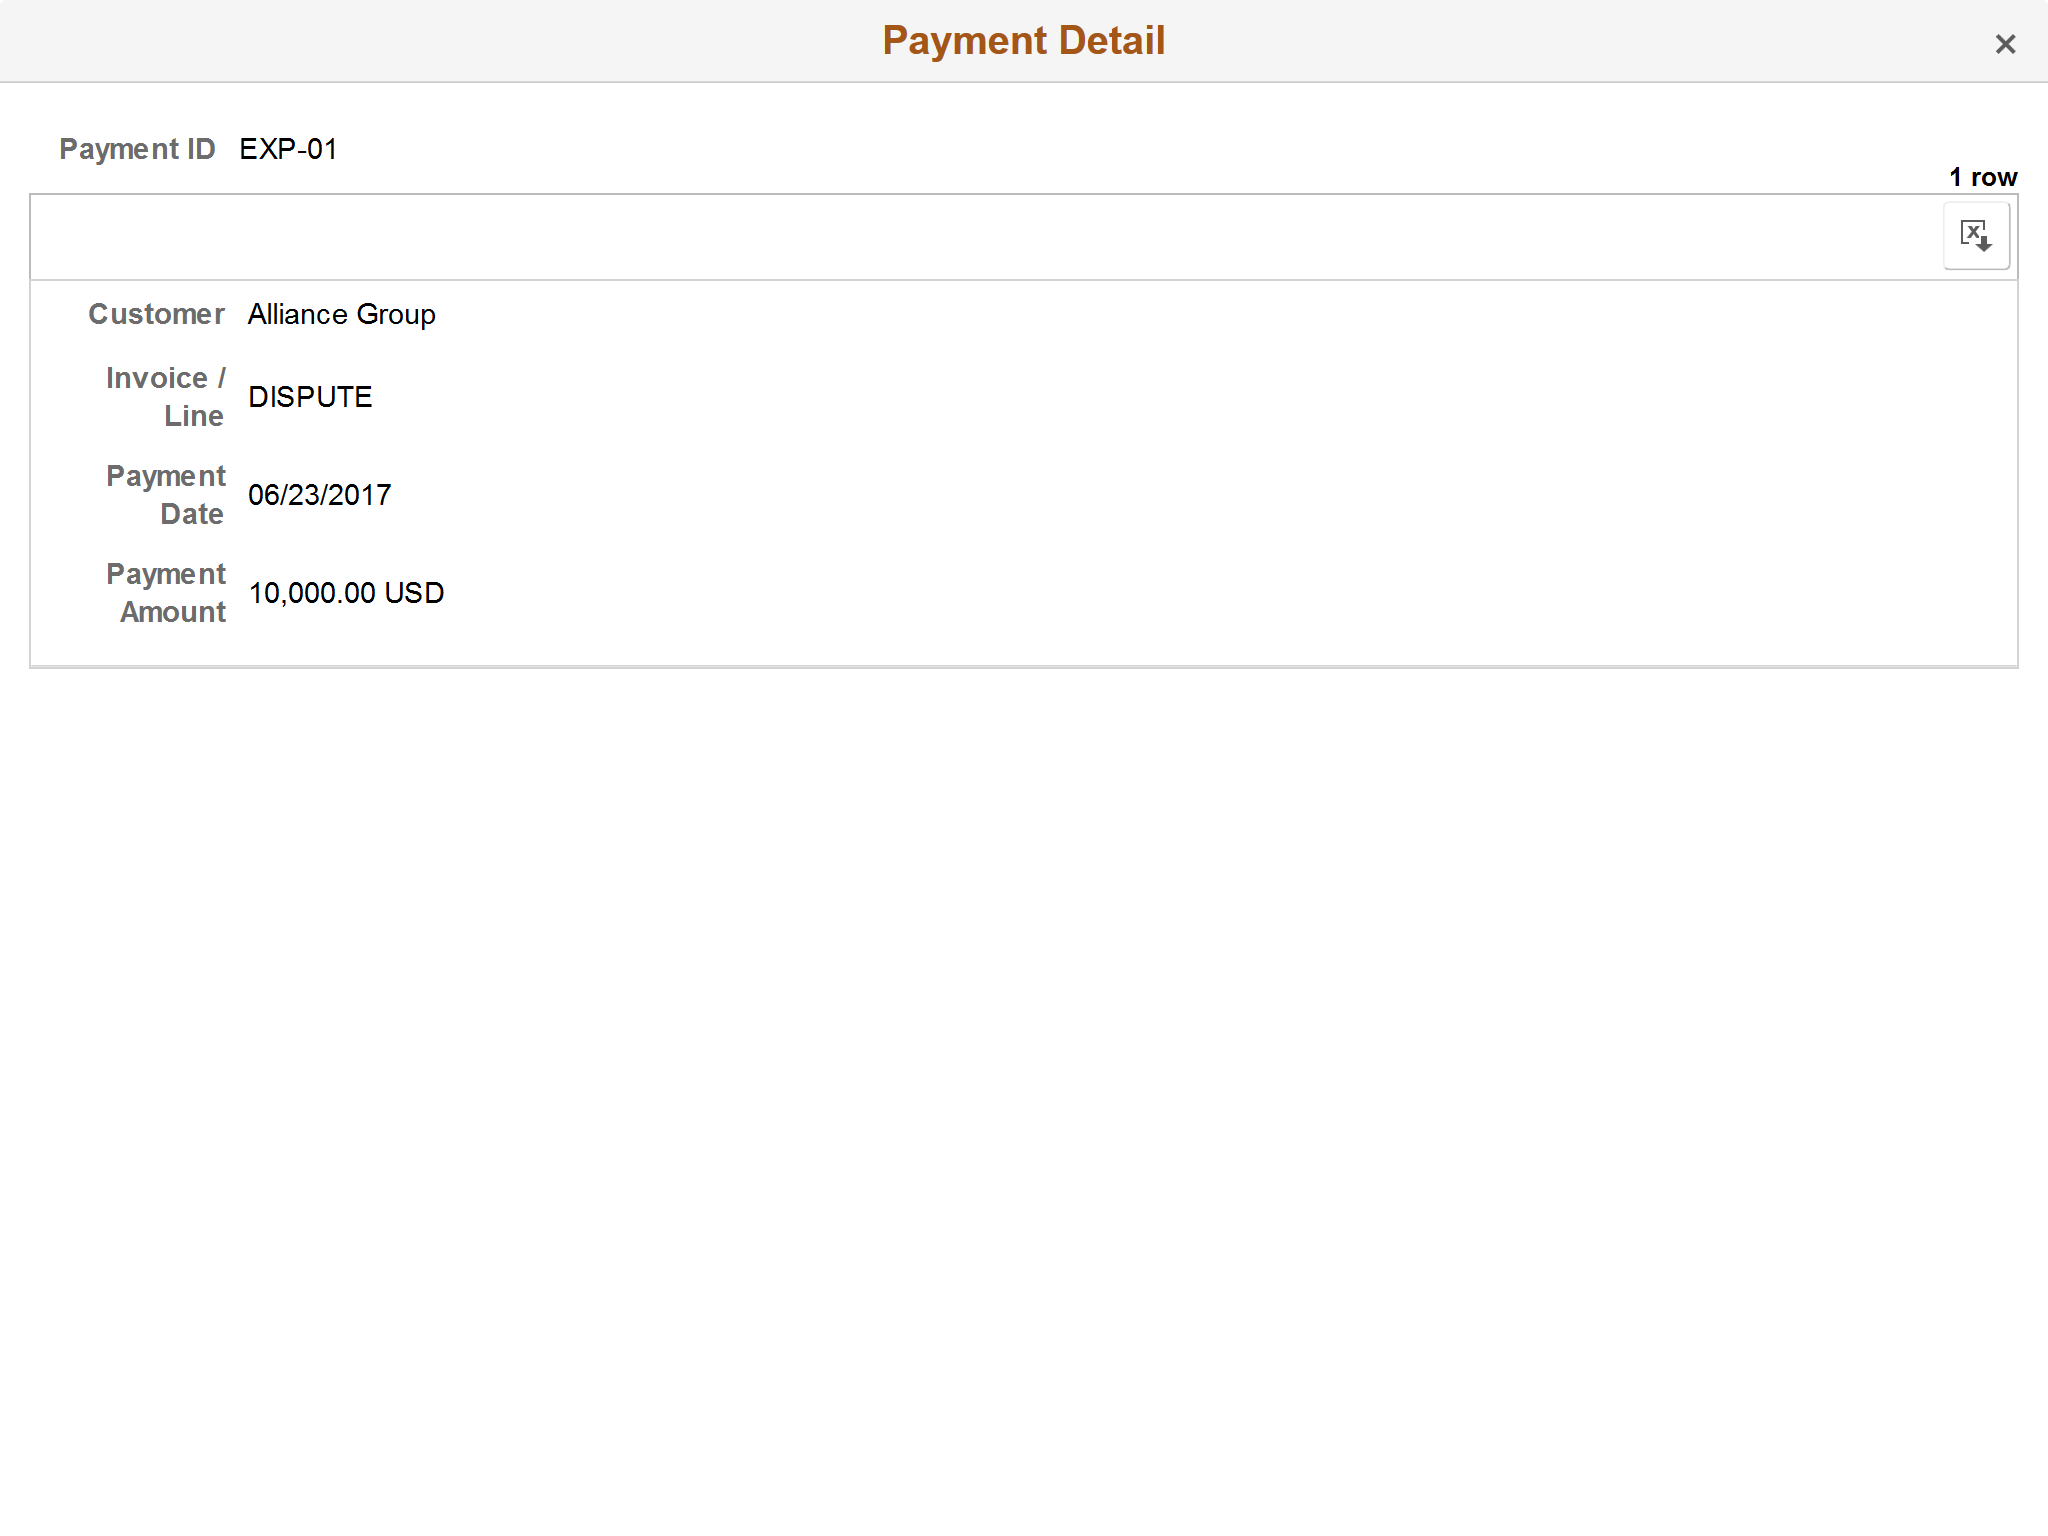 Payment Details page